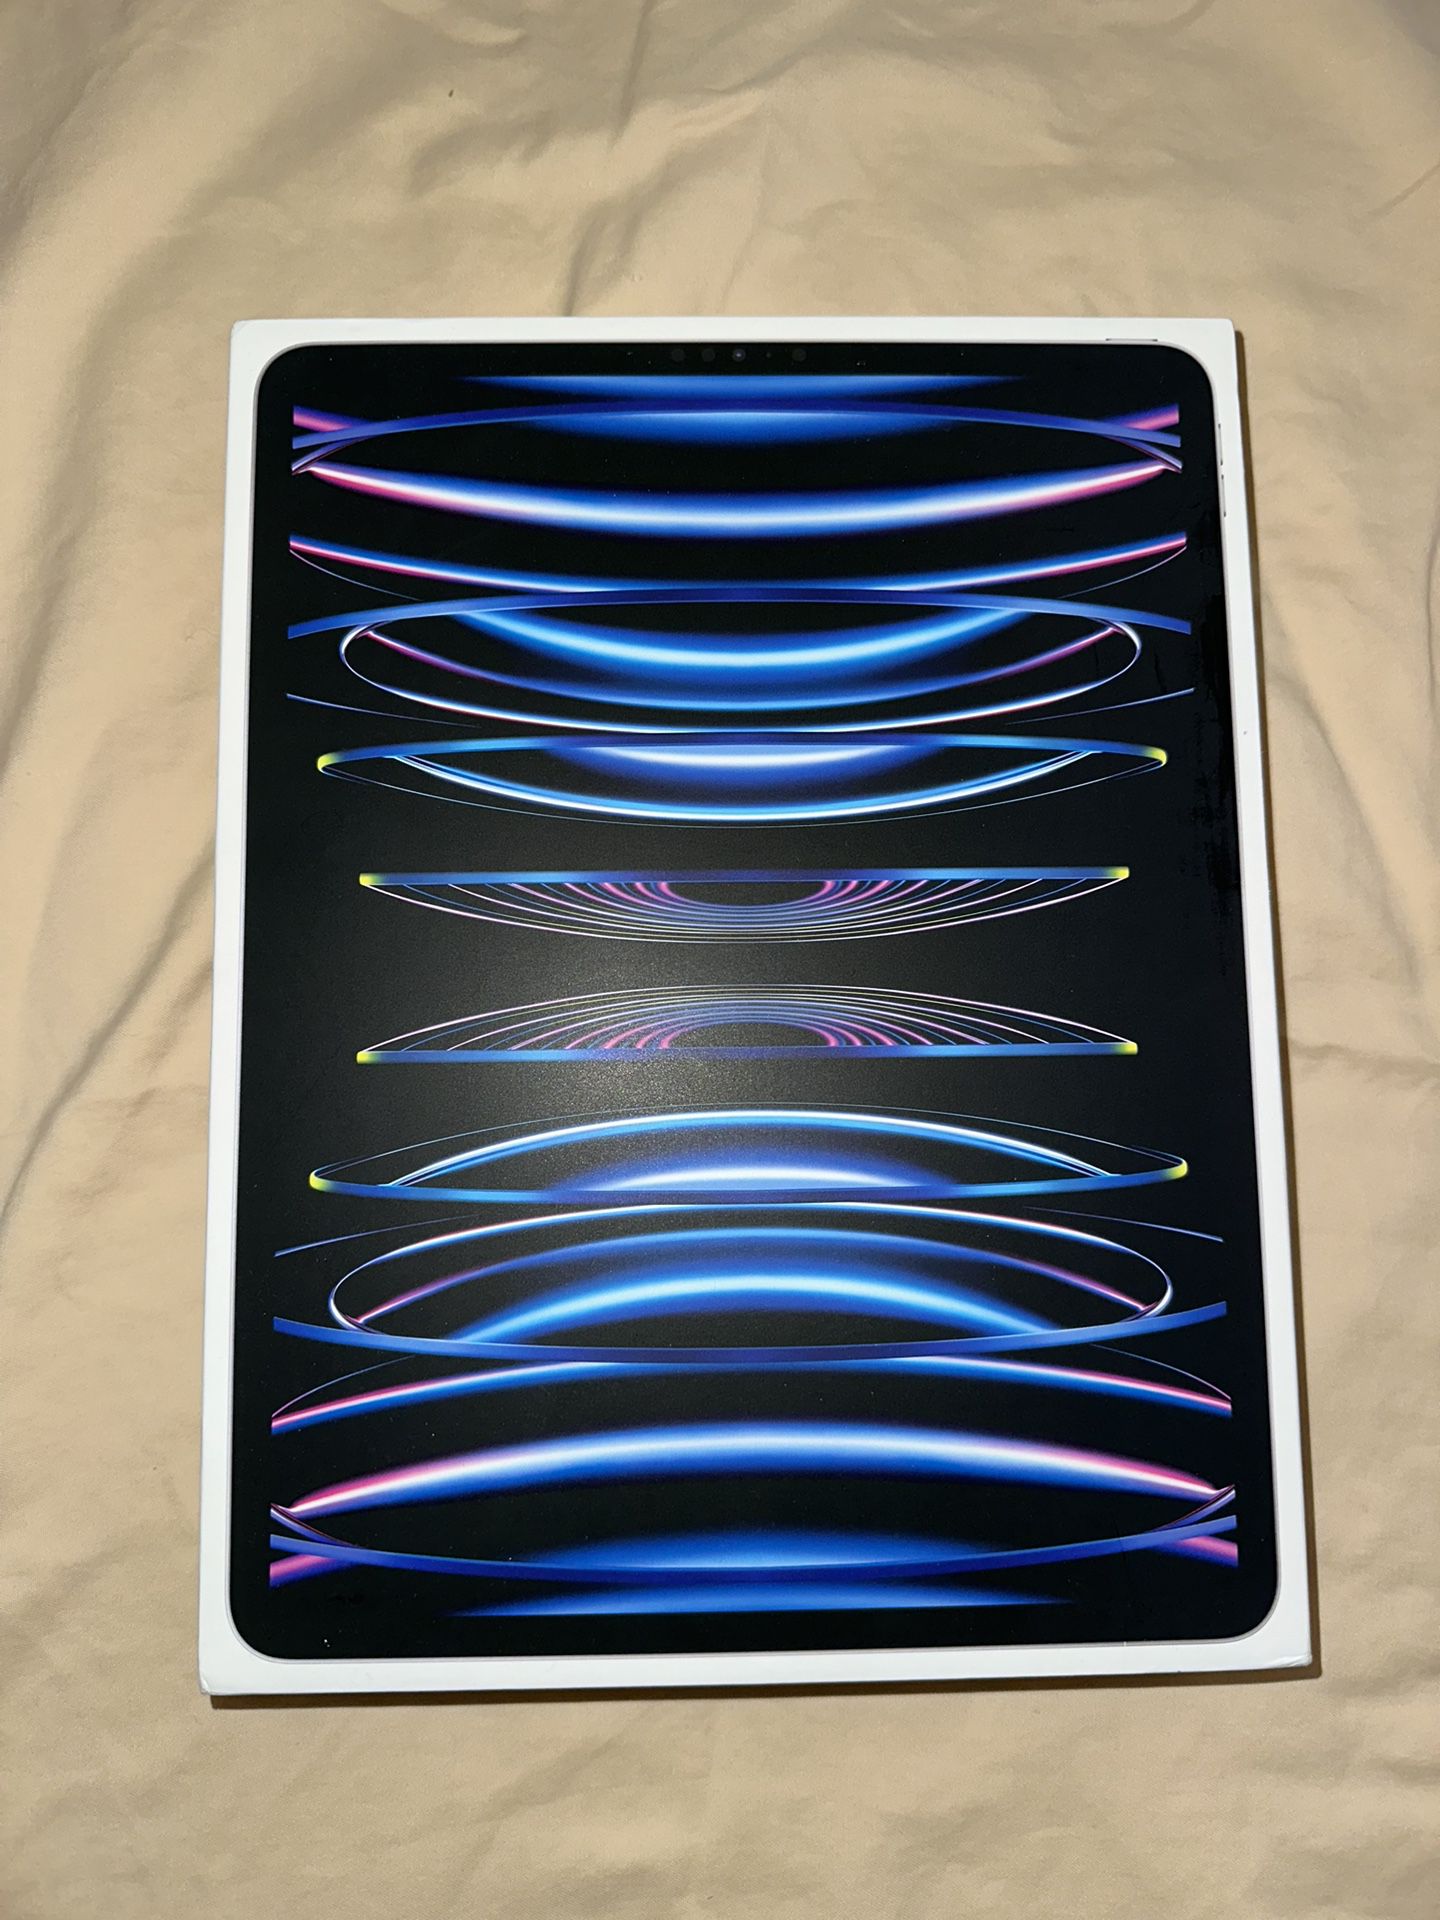 Silver New 12.9” Apple iPad Pro 6th Gen Latest Model Wifi 128gb I Can Bring It To You Now 